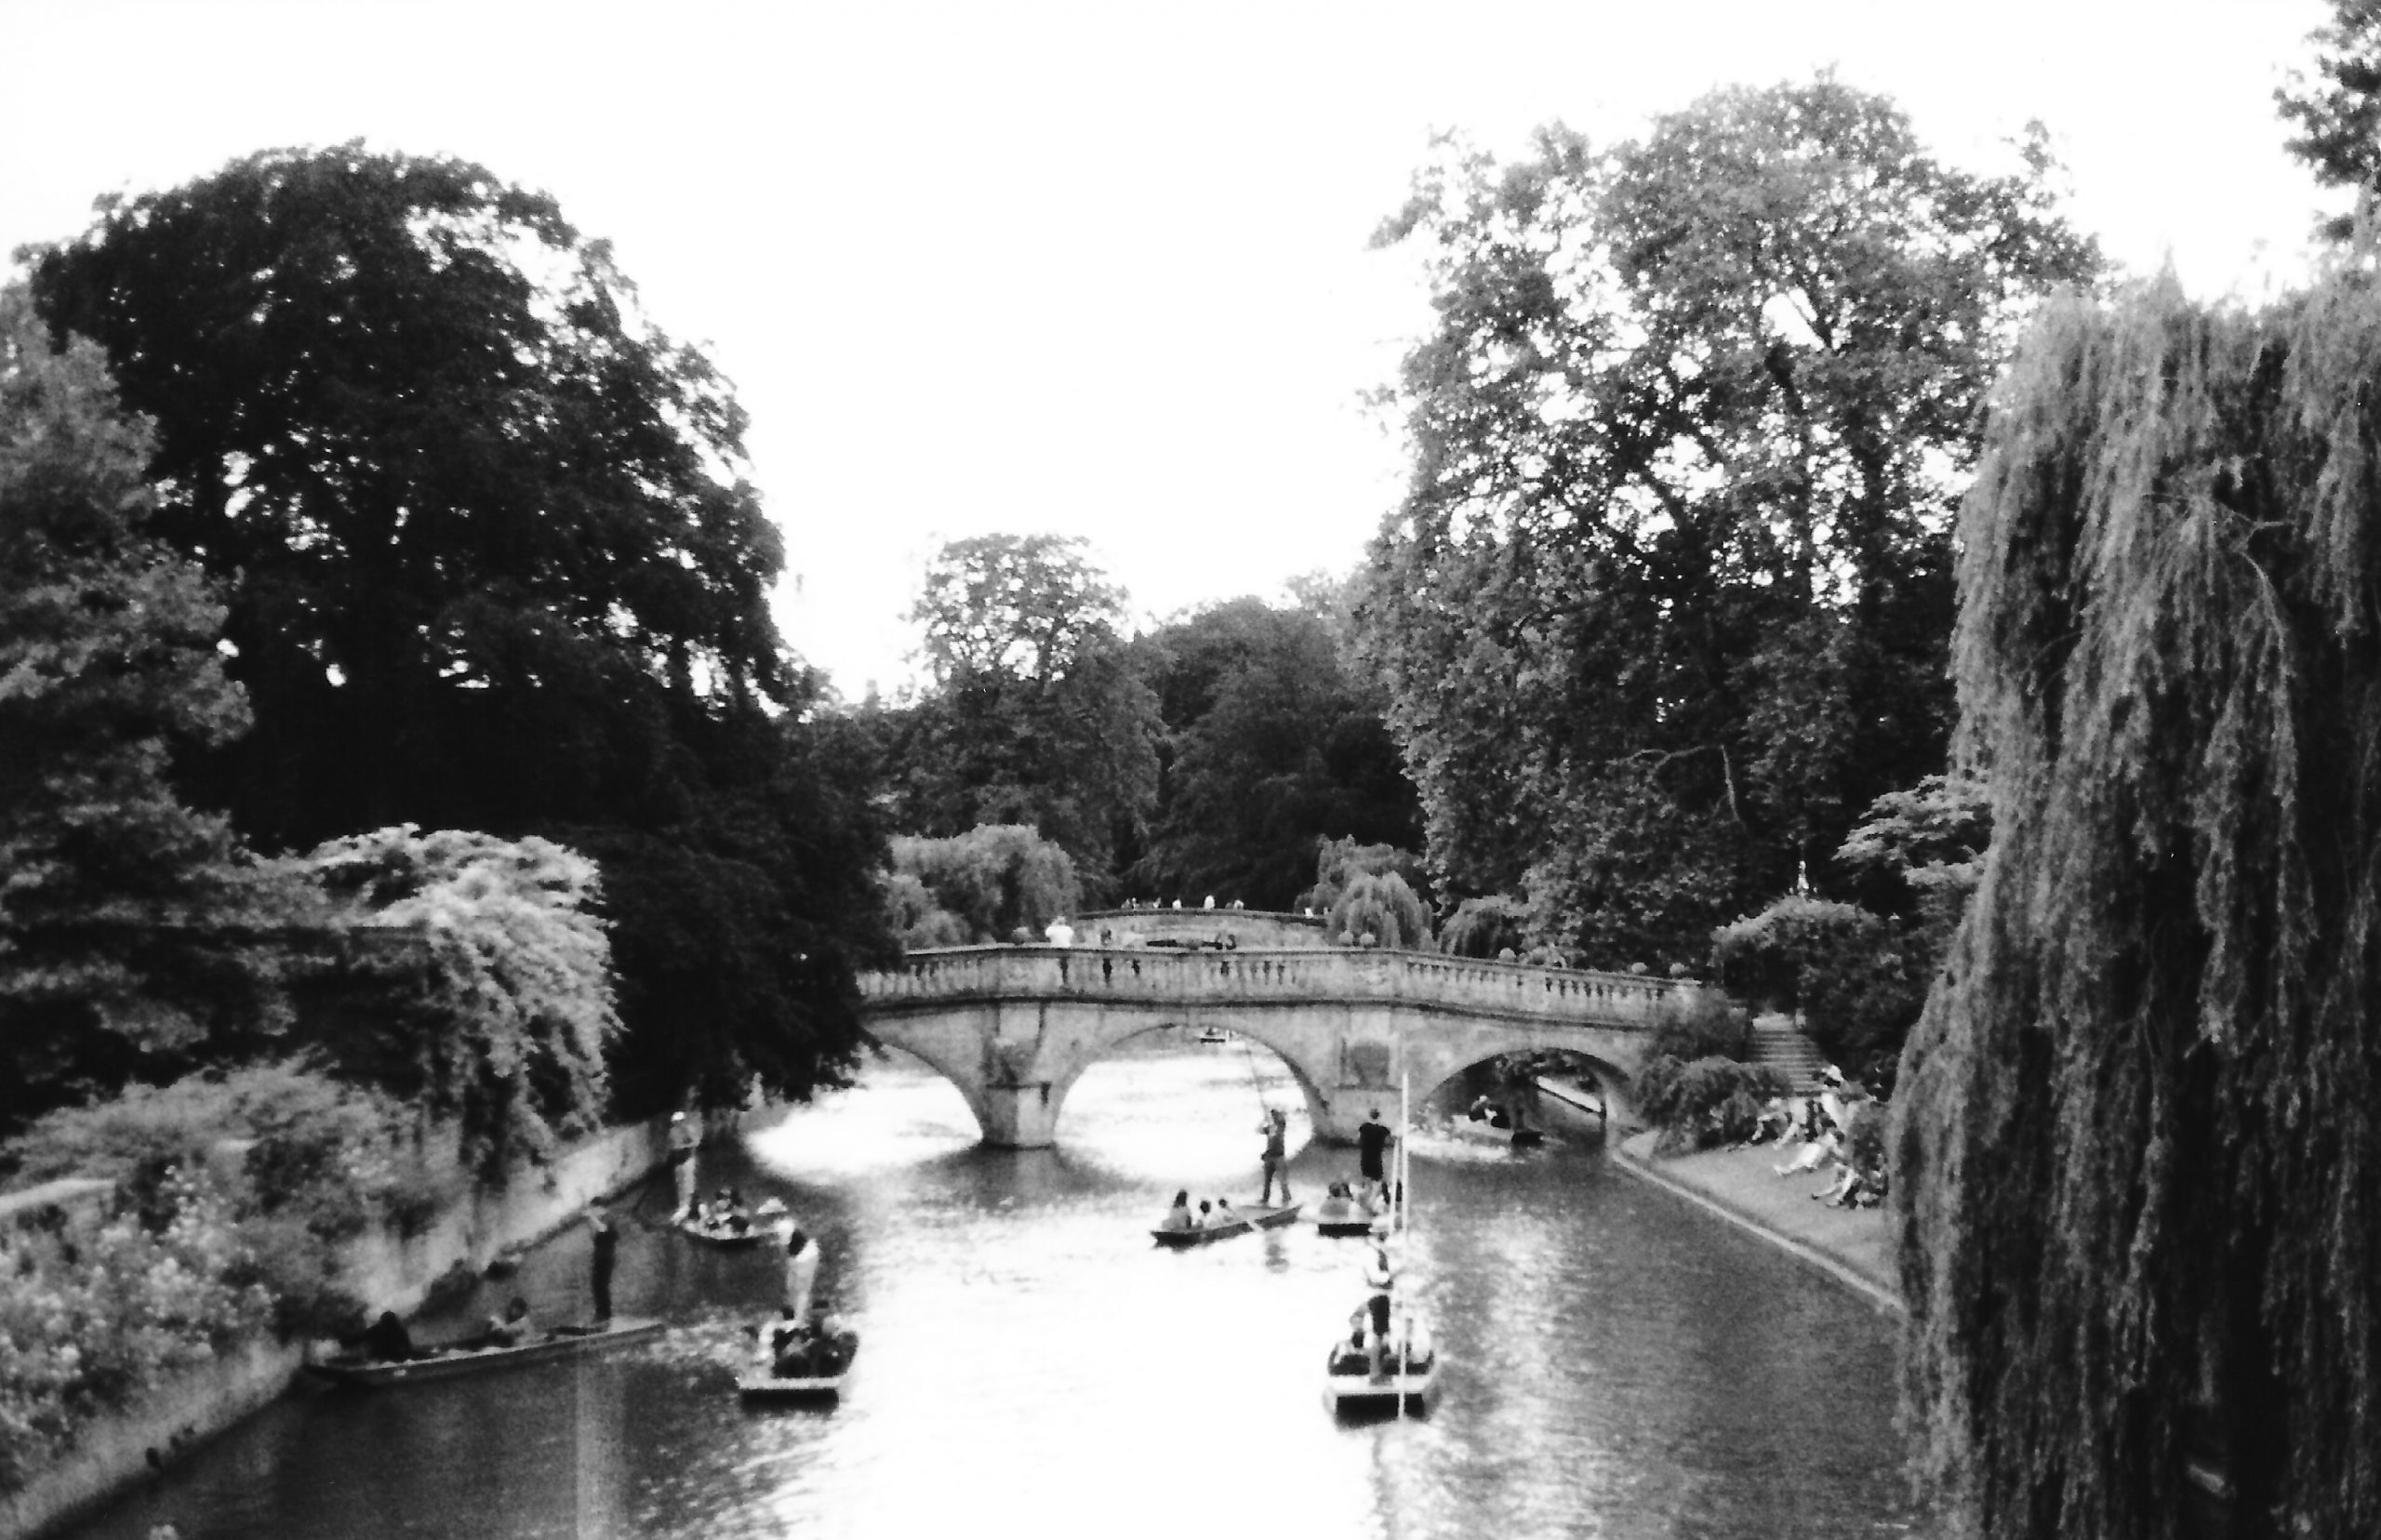 Cambridge, Uk in a black and white film roll